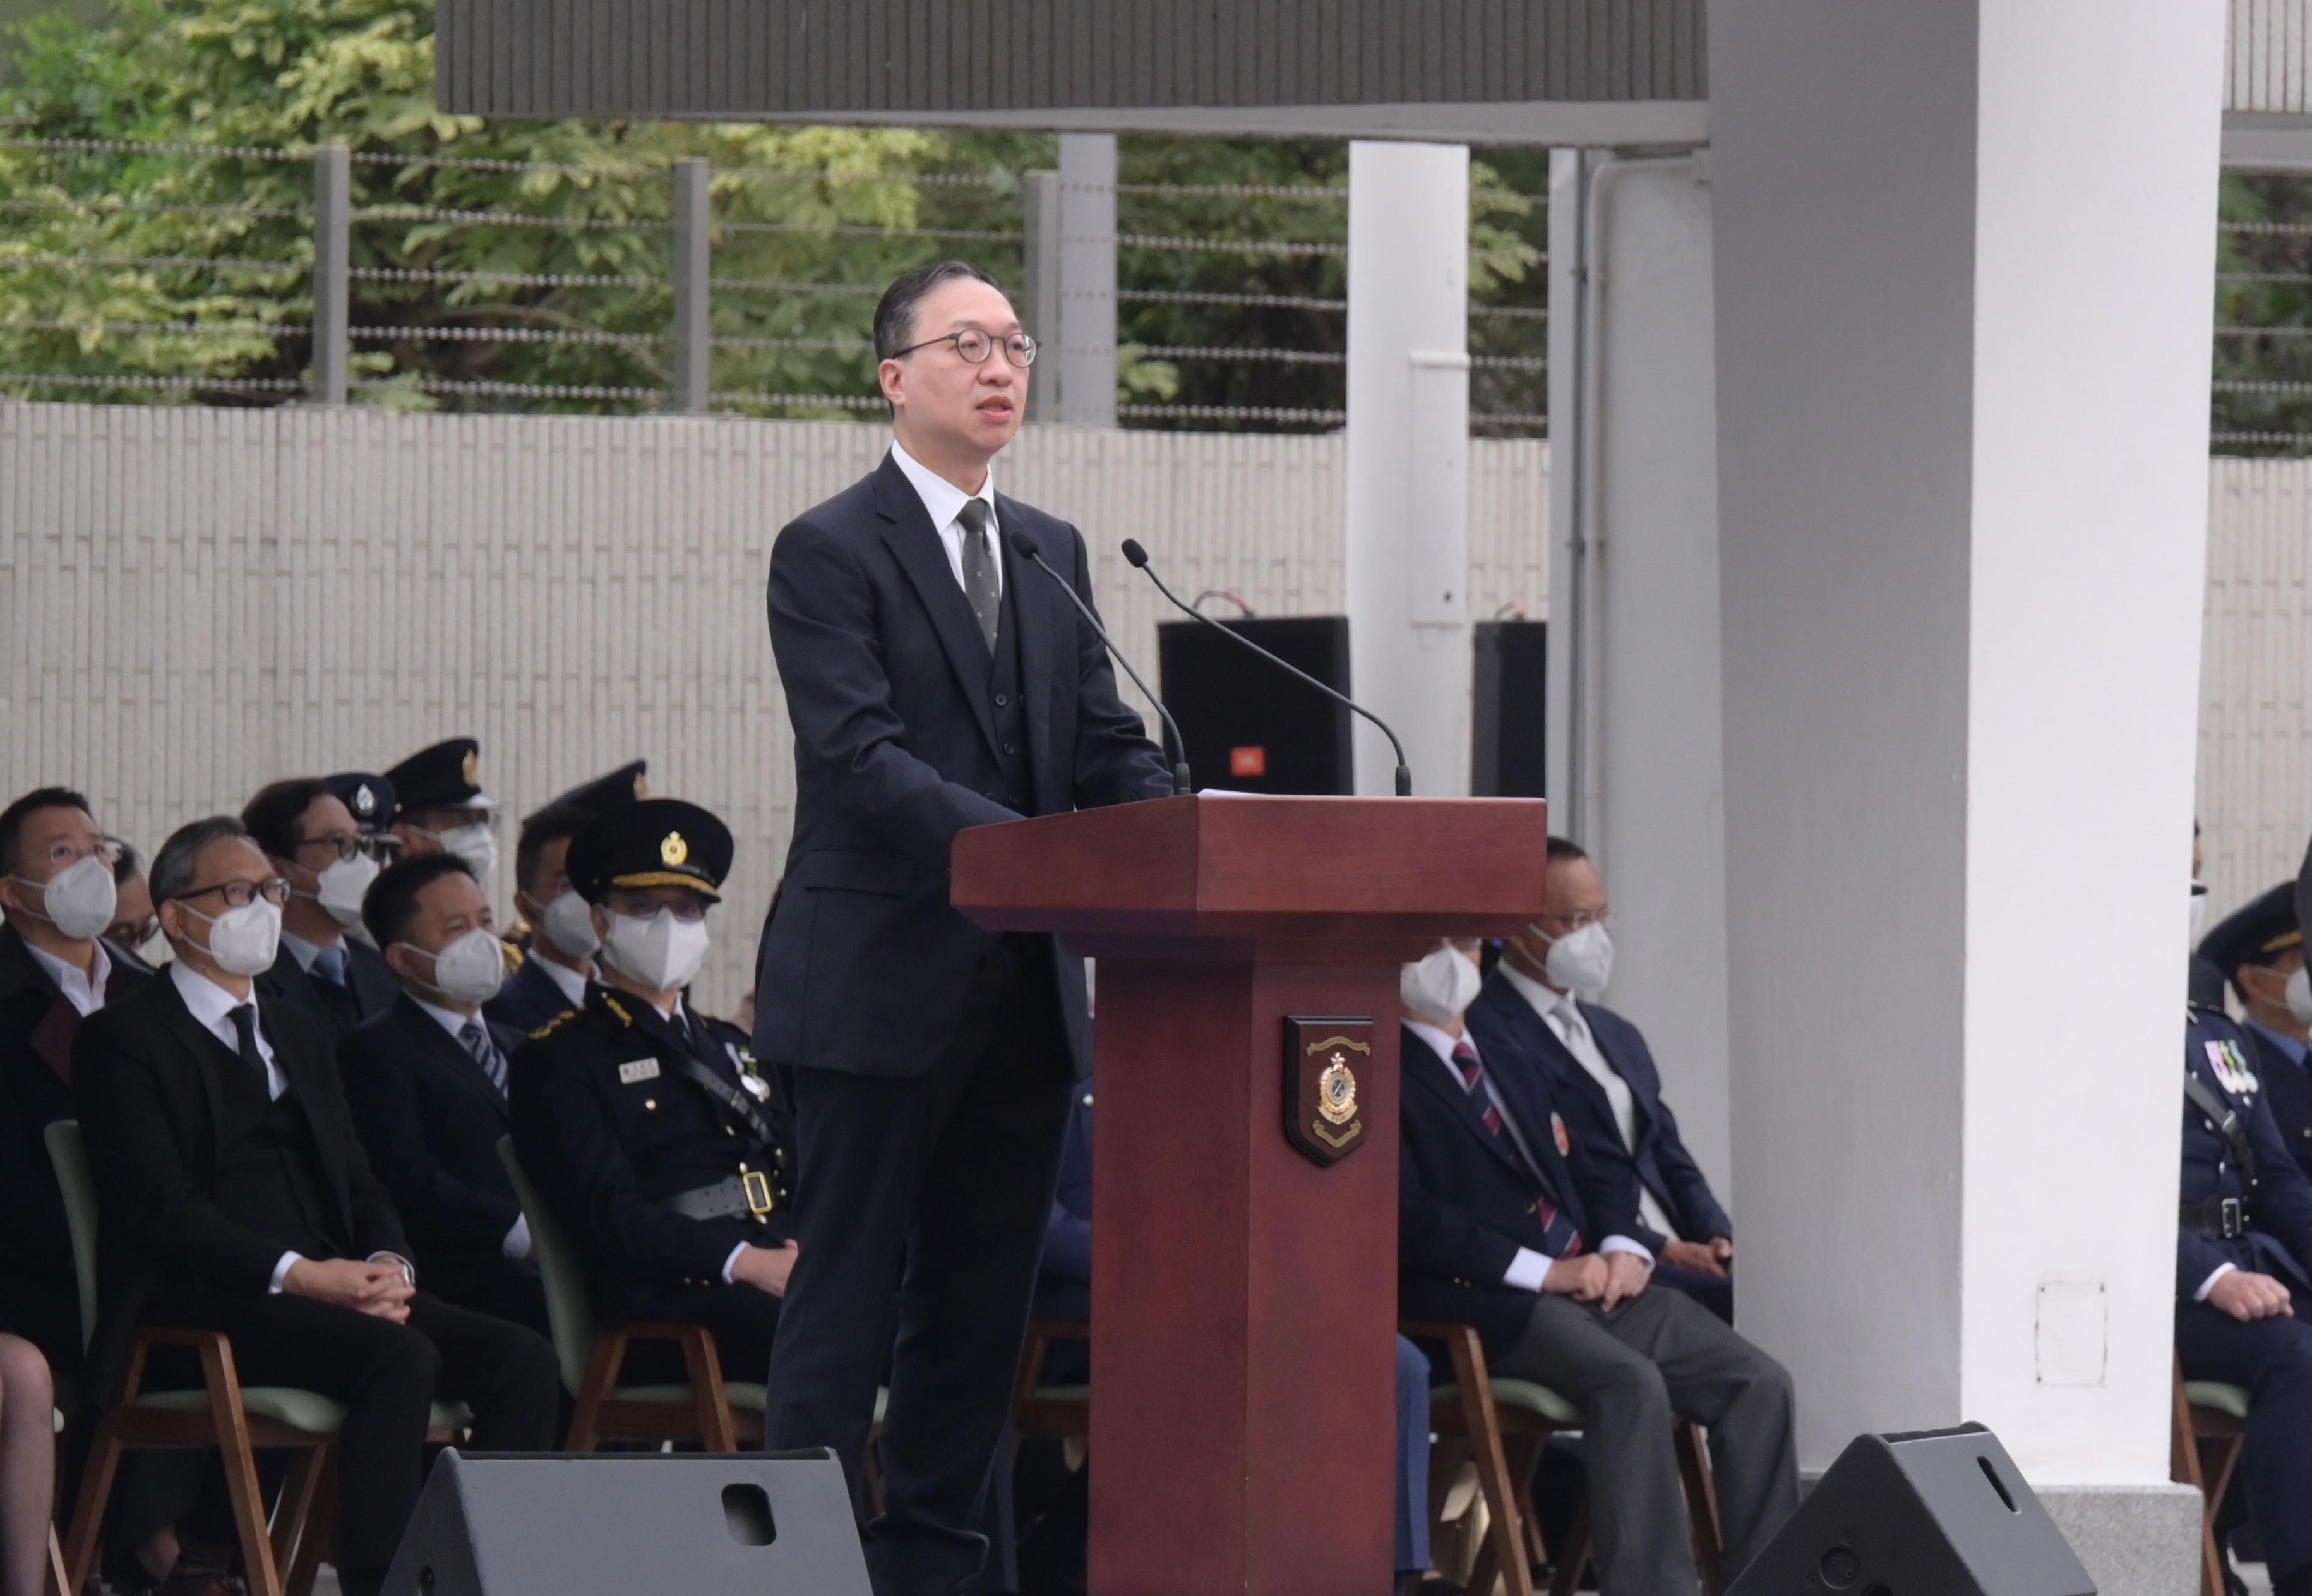 The Security Bureau held the Flag Raising Ceremony to Commemorate 40th Anniversary of Constitution today (December 4). Photo shows the Secretary for Justice, Mr Paul Lam, SC, addressing the flag raising ceremony.